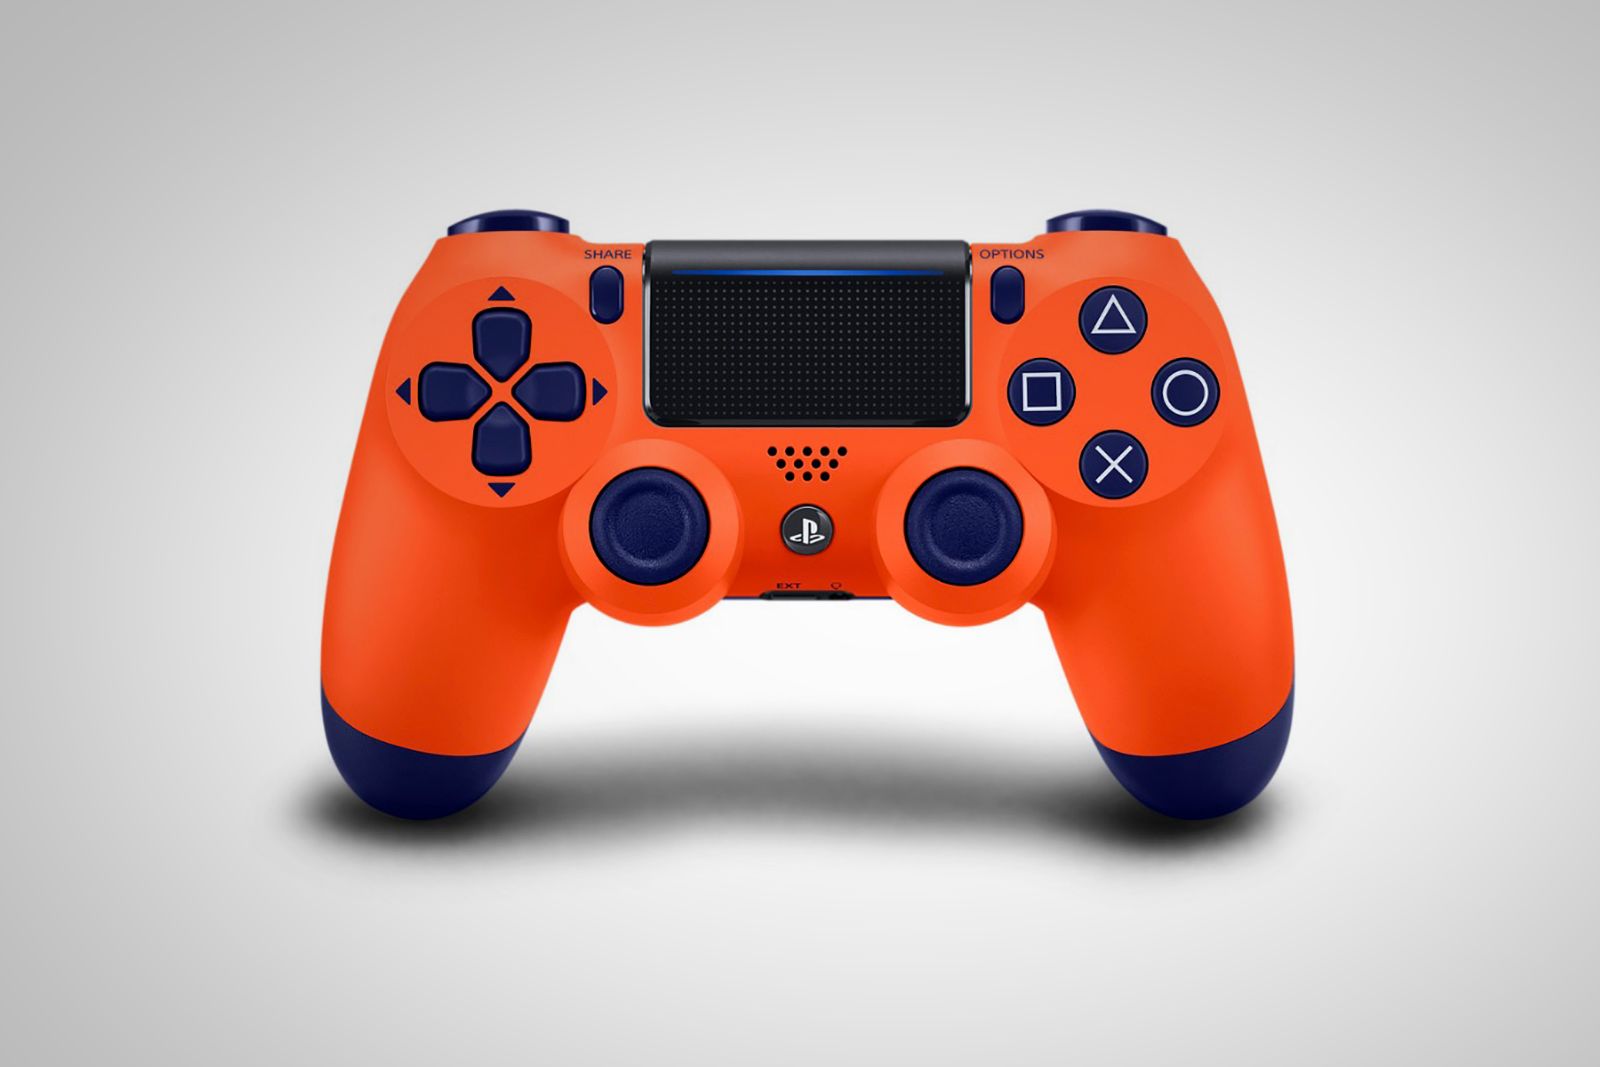 This is what Sonys new colourful PS4 controllers look like image 1